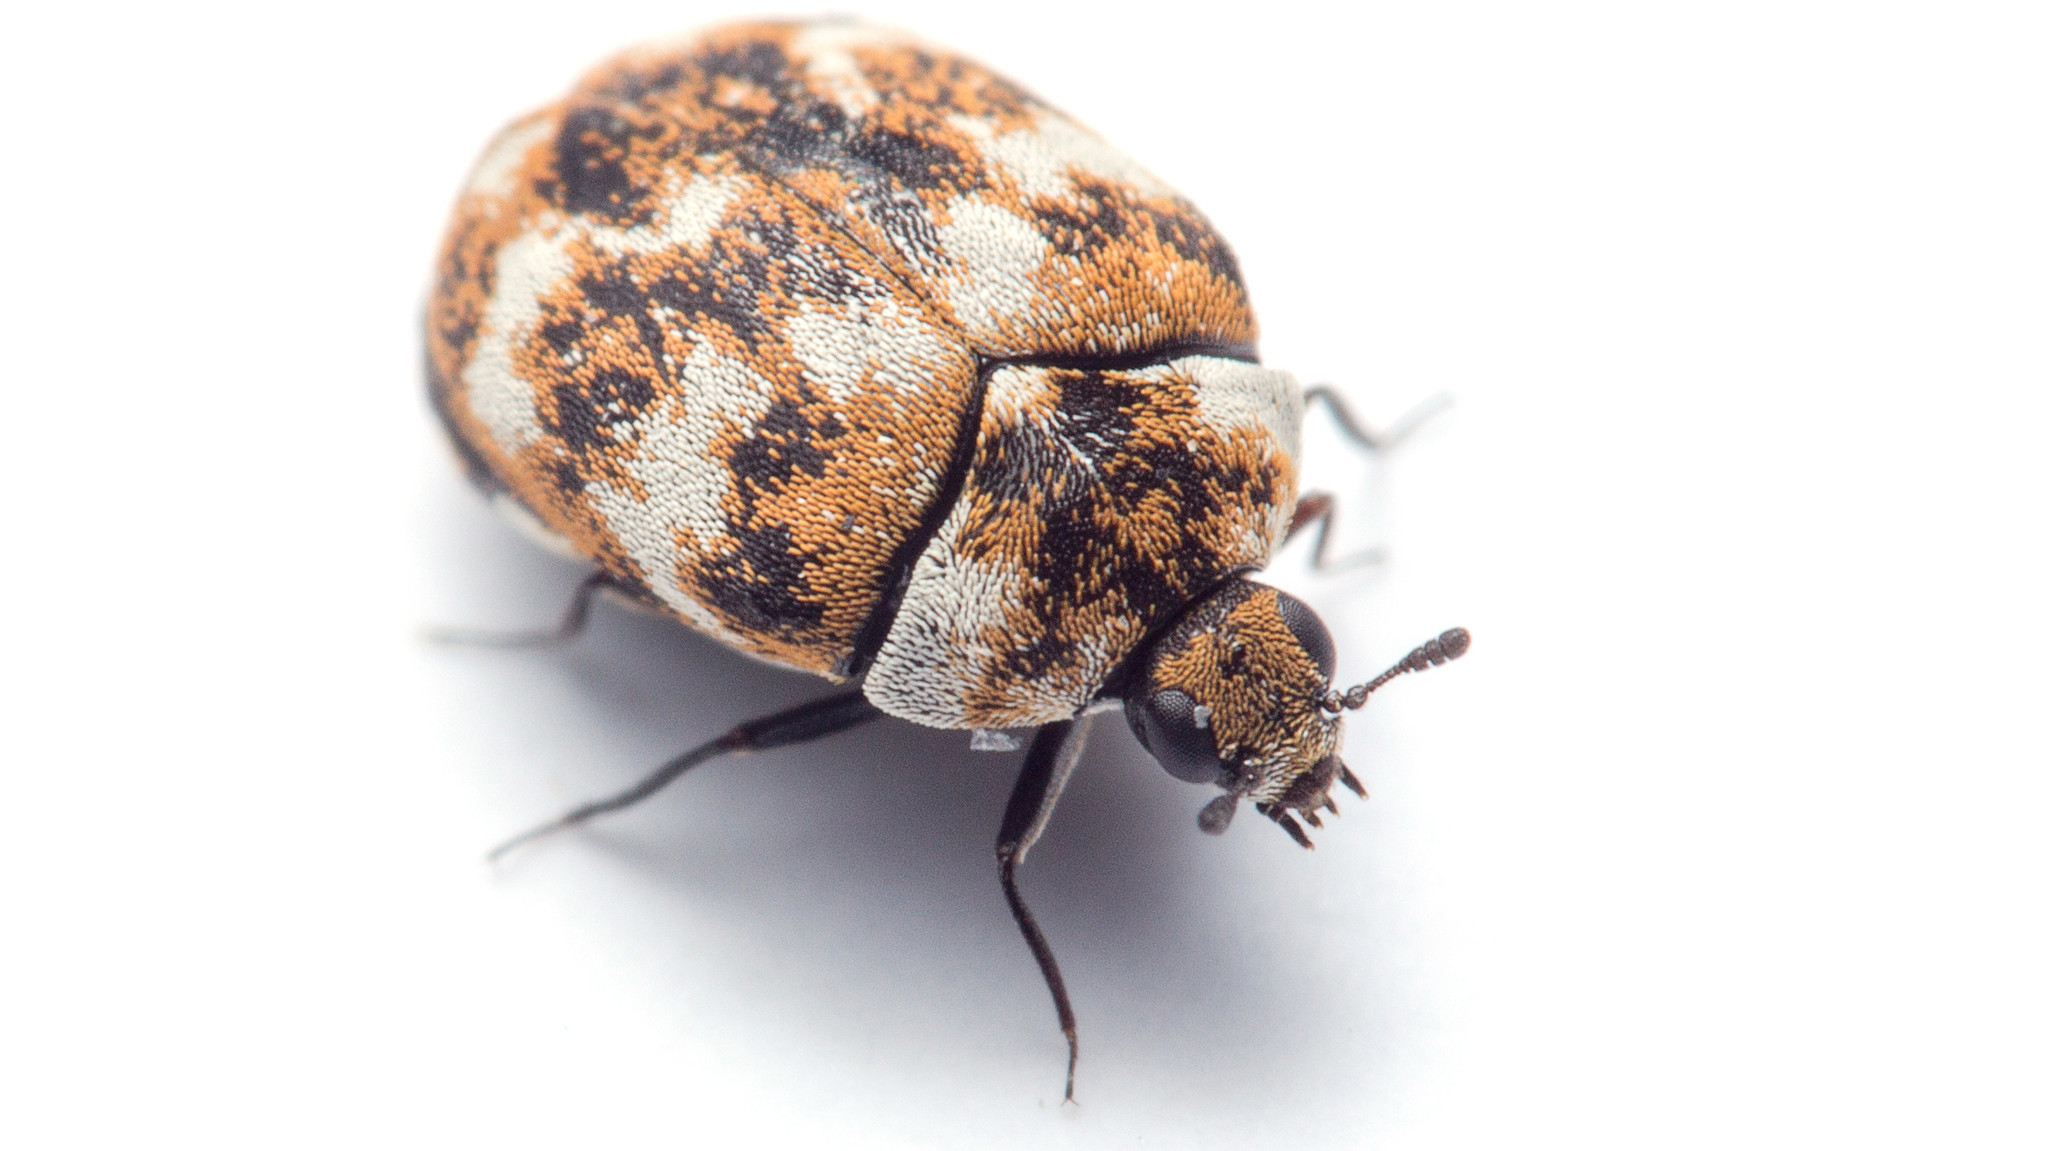 The average home has more than 100 kinds of bugs living in it, new